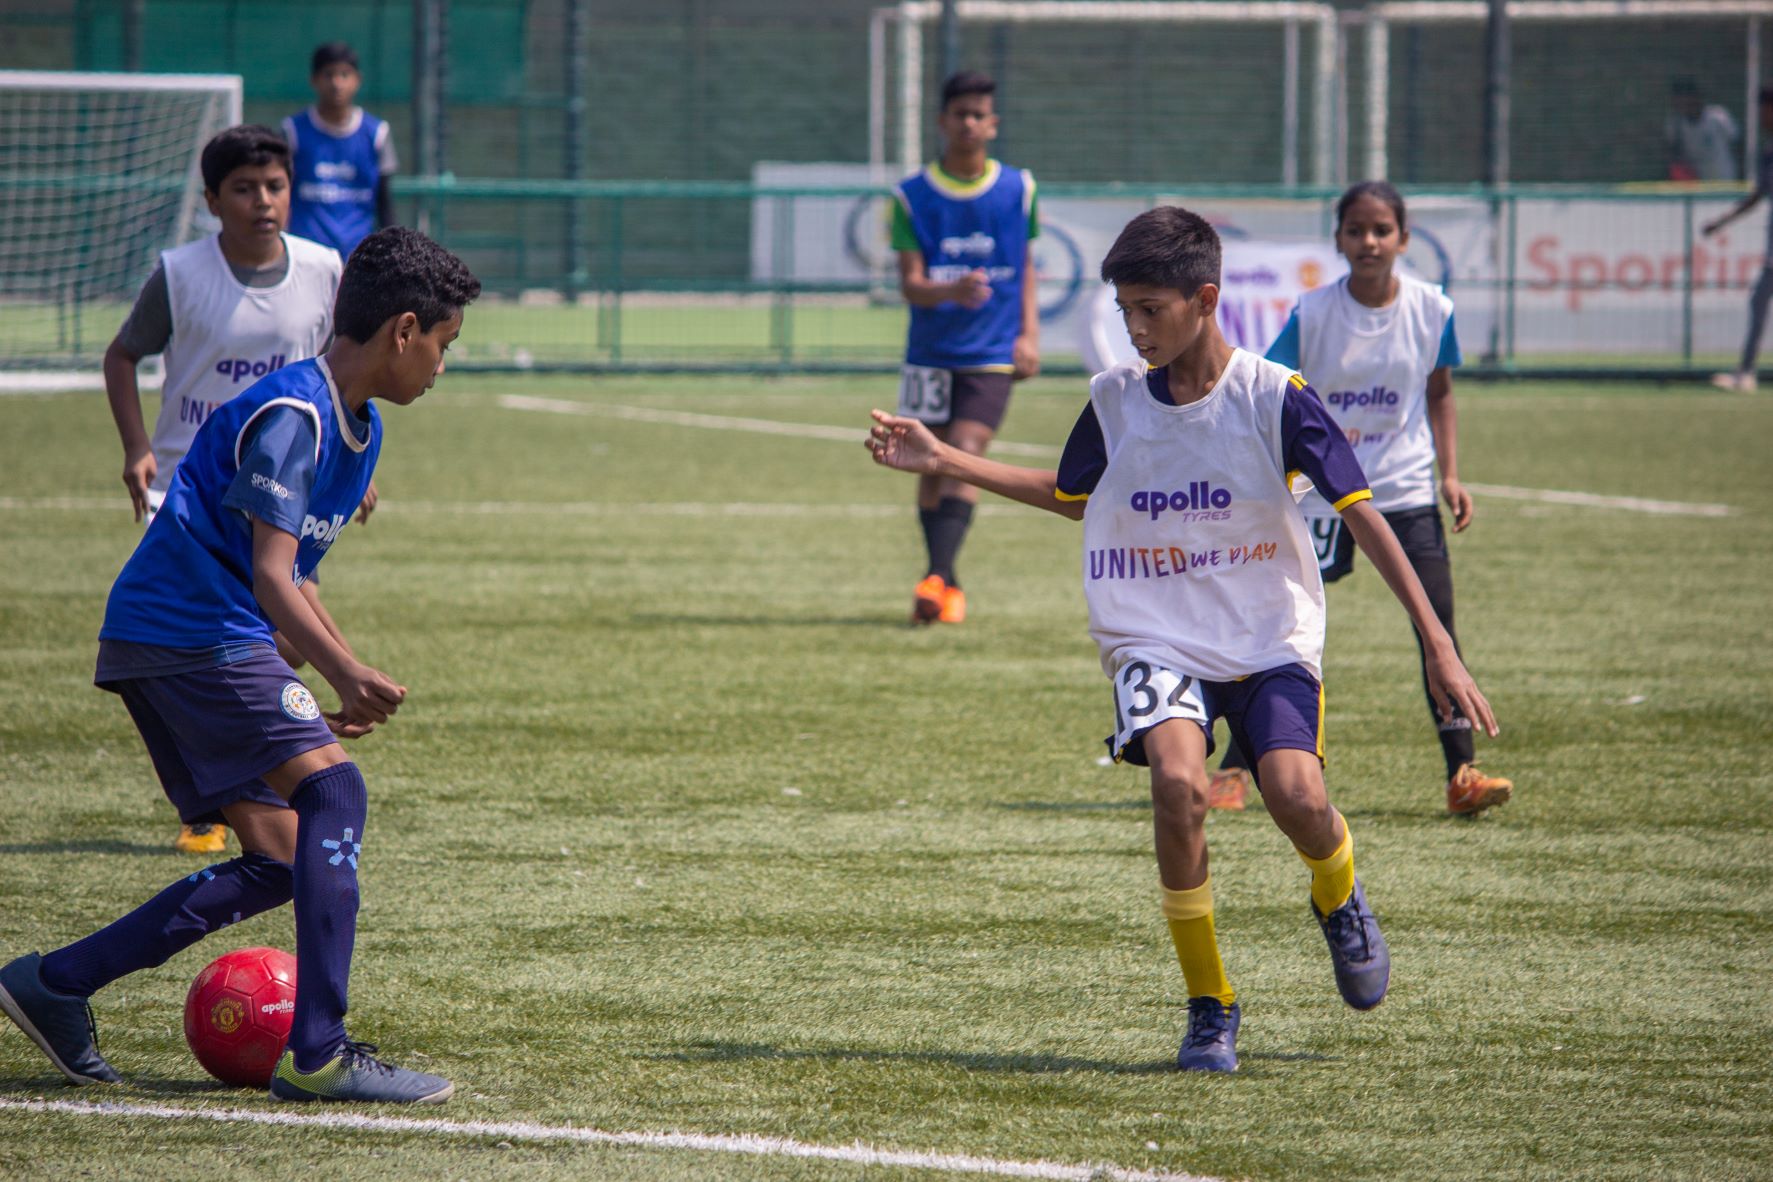 Apollo Tyres and Manchester United launch the second edition of ‘United We Play’ in India